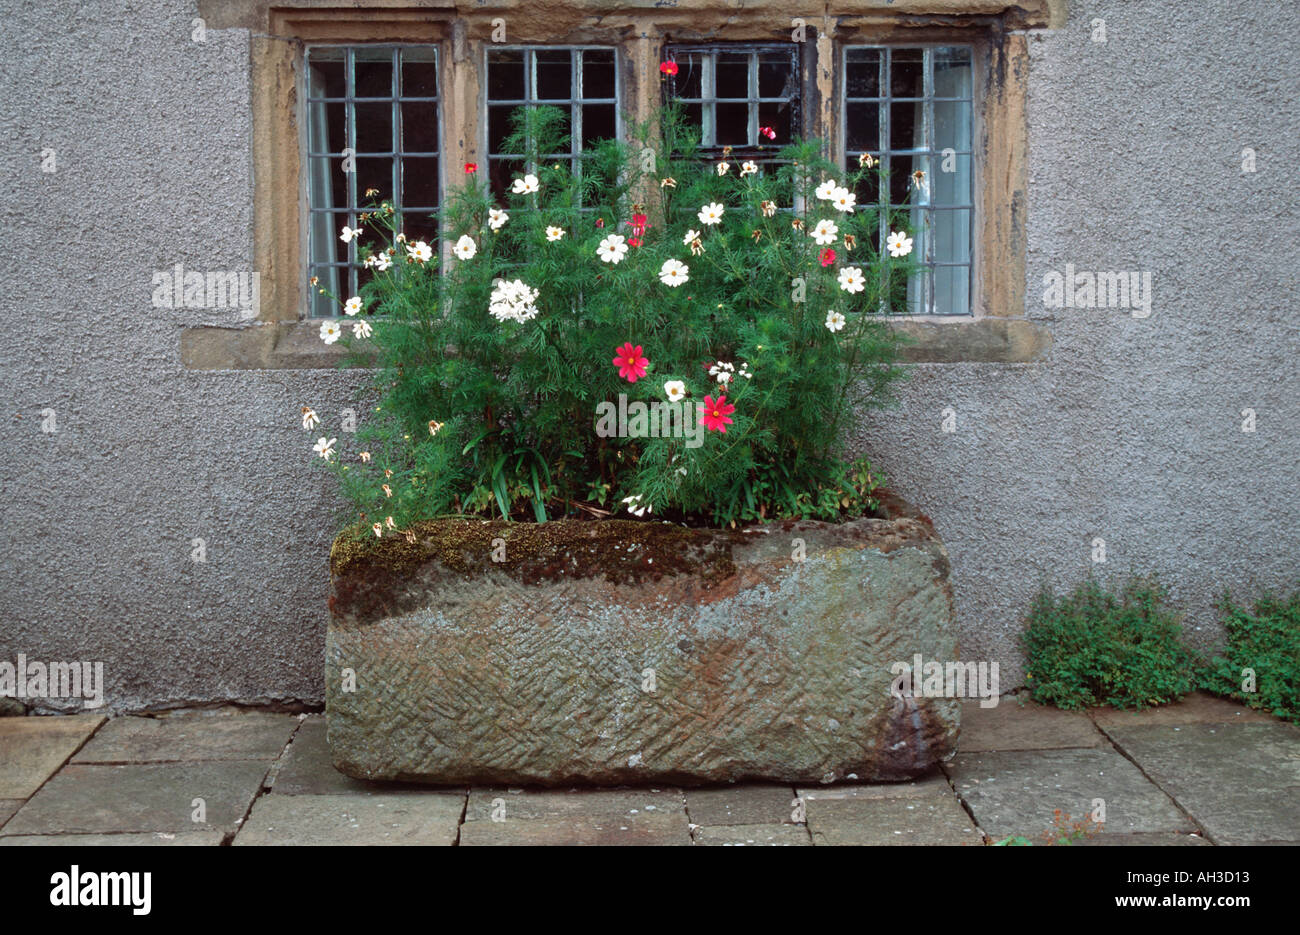 Large stone trough full of flowers at Eyam Hall in Derbyshire 'Great Britain' Stock Photo